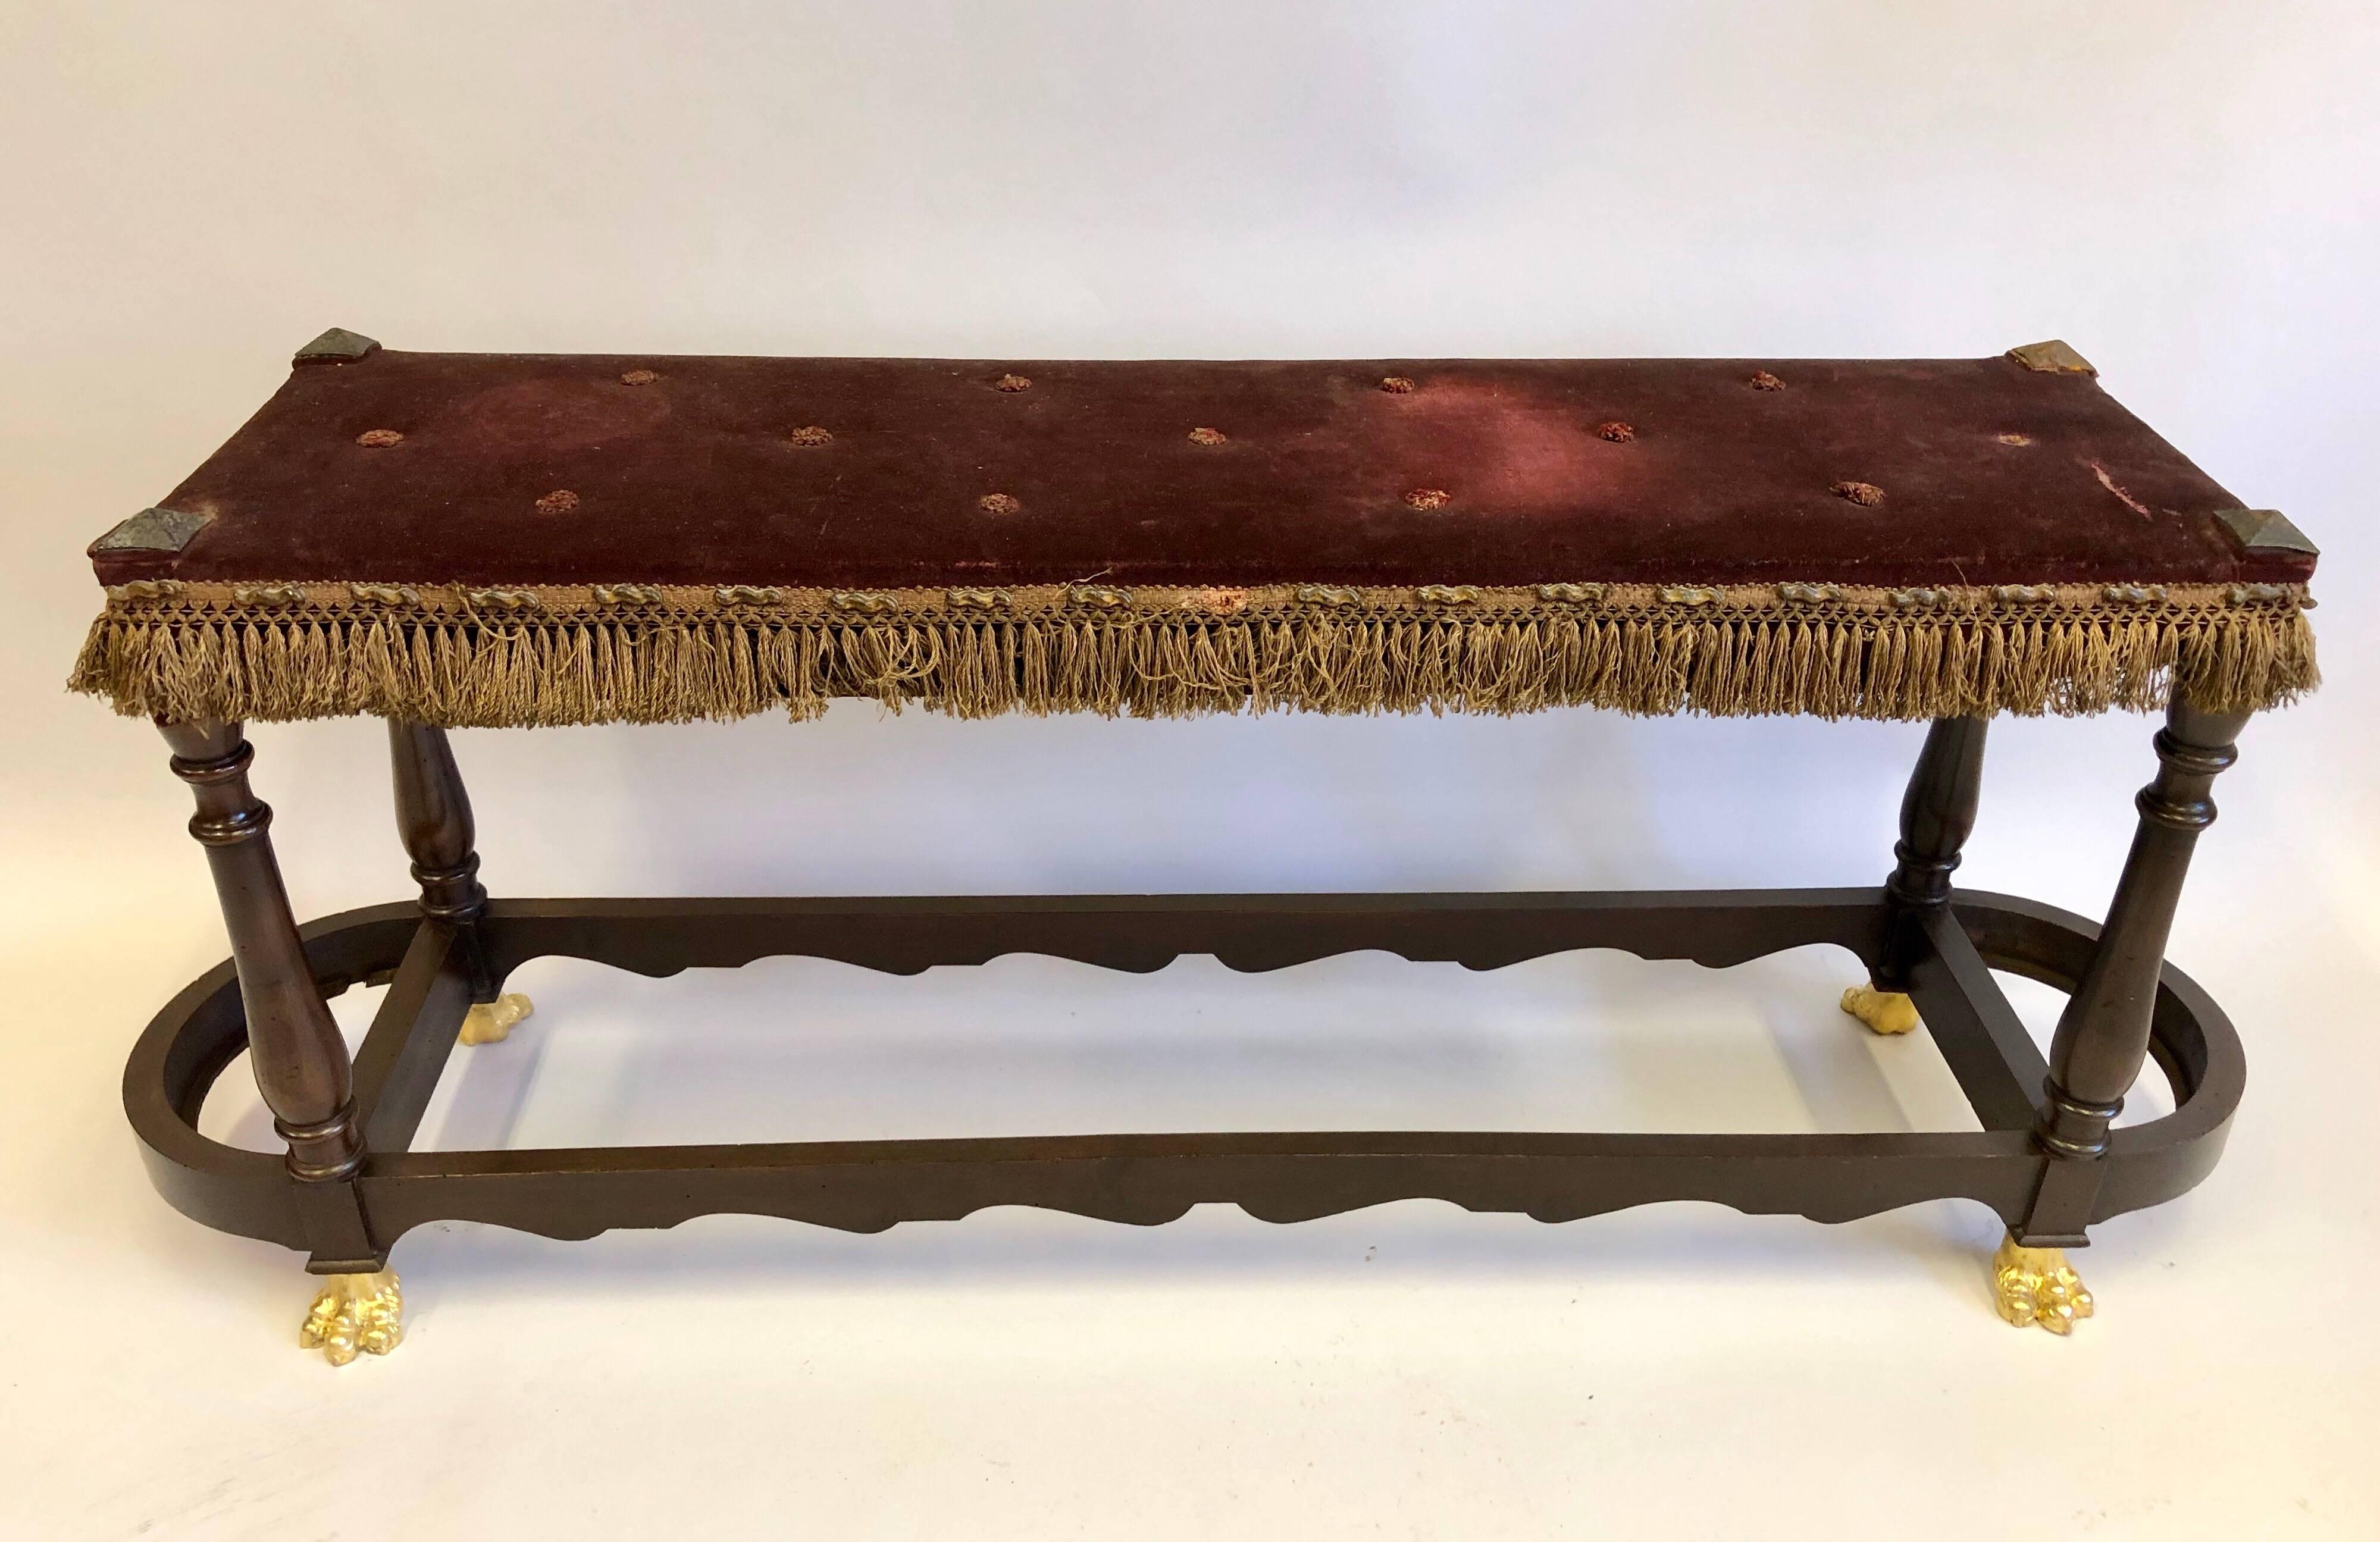 Elegant Italian 19th century neoclassical bench with sober, modern lines, pilaster form legs and gilt bronze lions paw feet. The bench is completed with wrought Iron studs in pyramid form at each corner of the seat.

The bench can fit in a modern